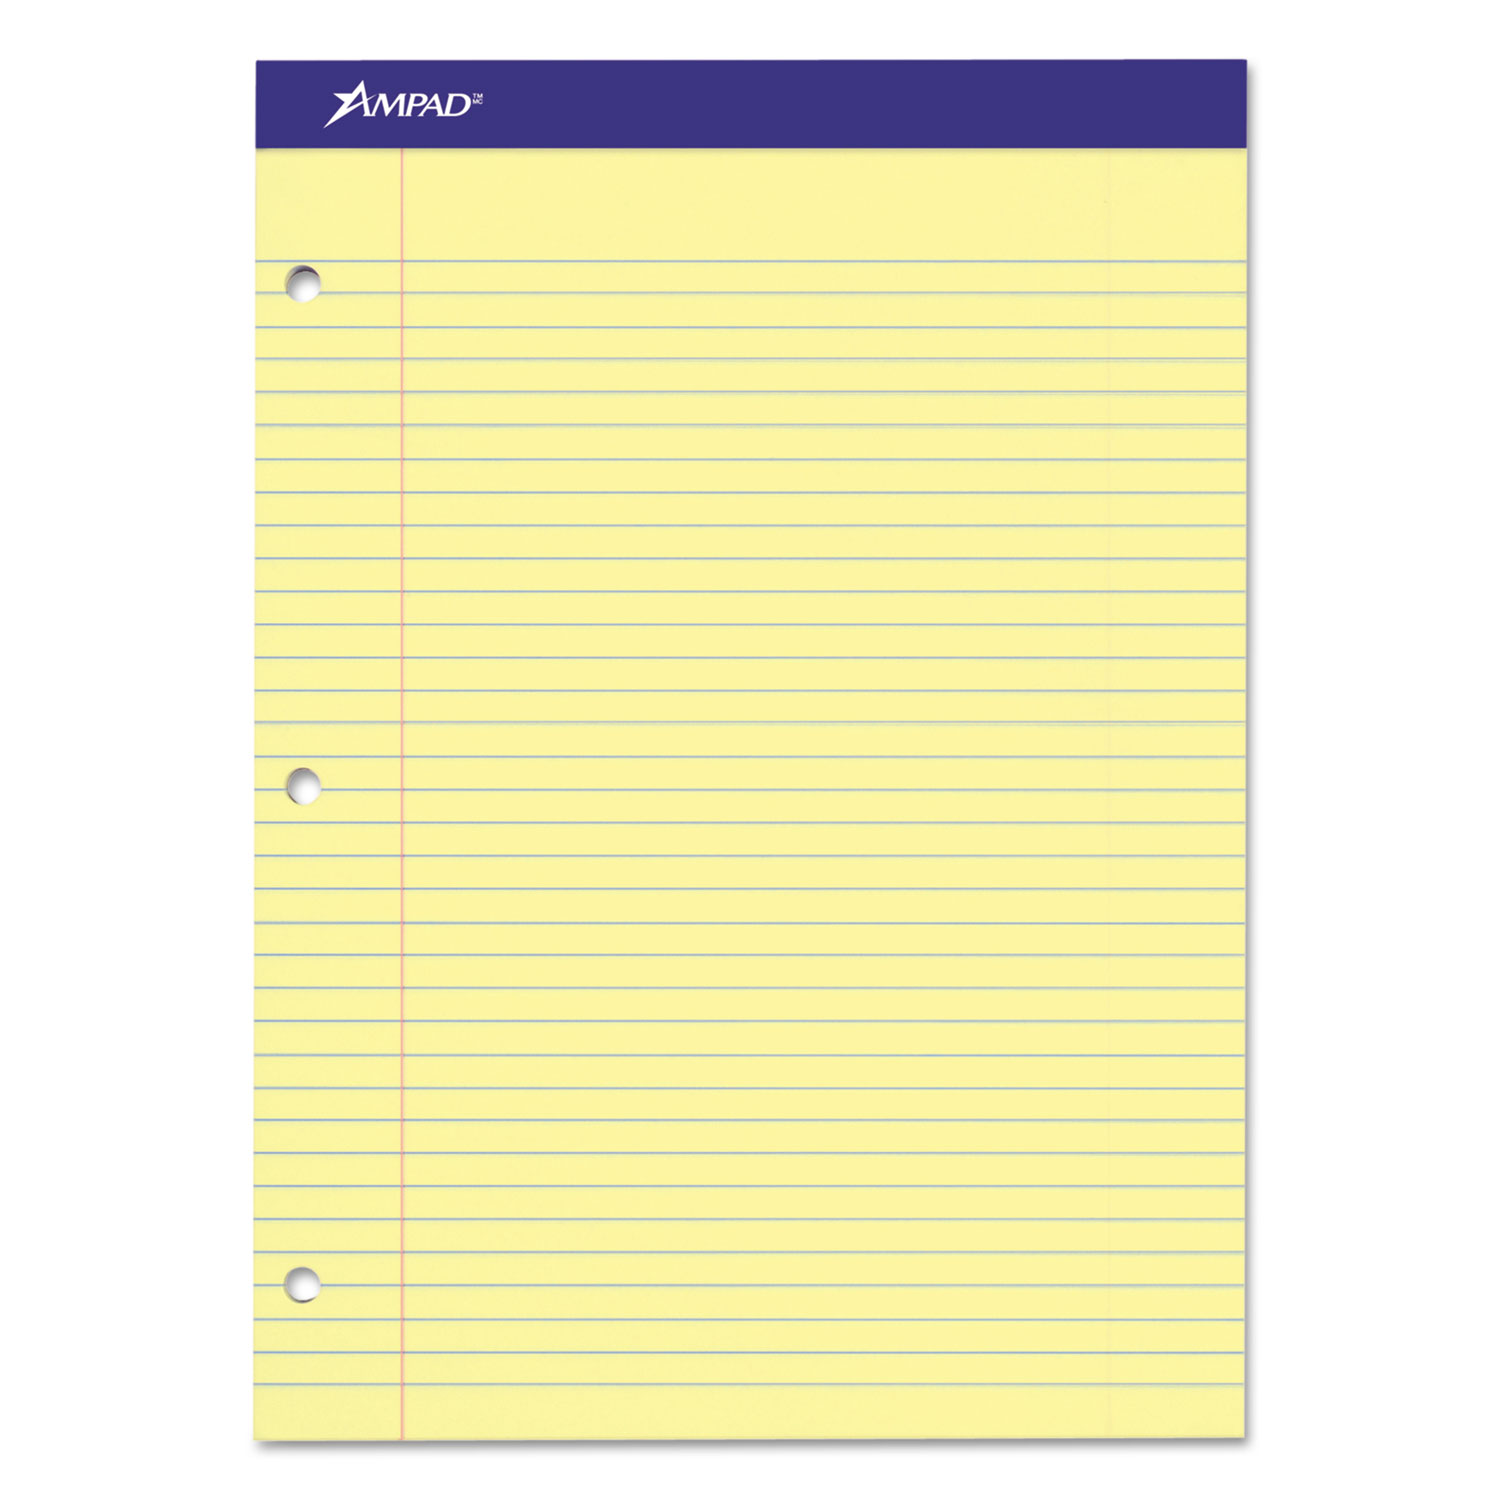 Double Sheets Pad, College/Medium, 8 1/2 x 11 3/4, Canary, 100 Sheets